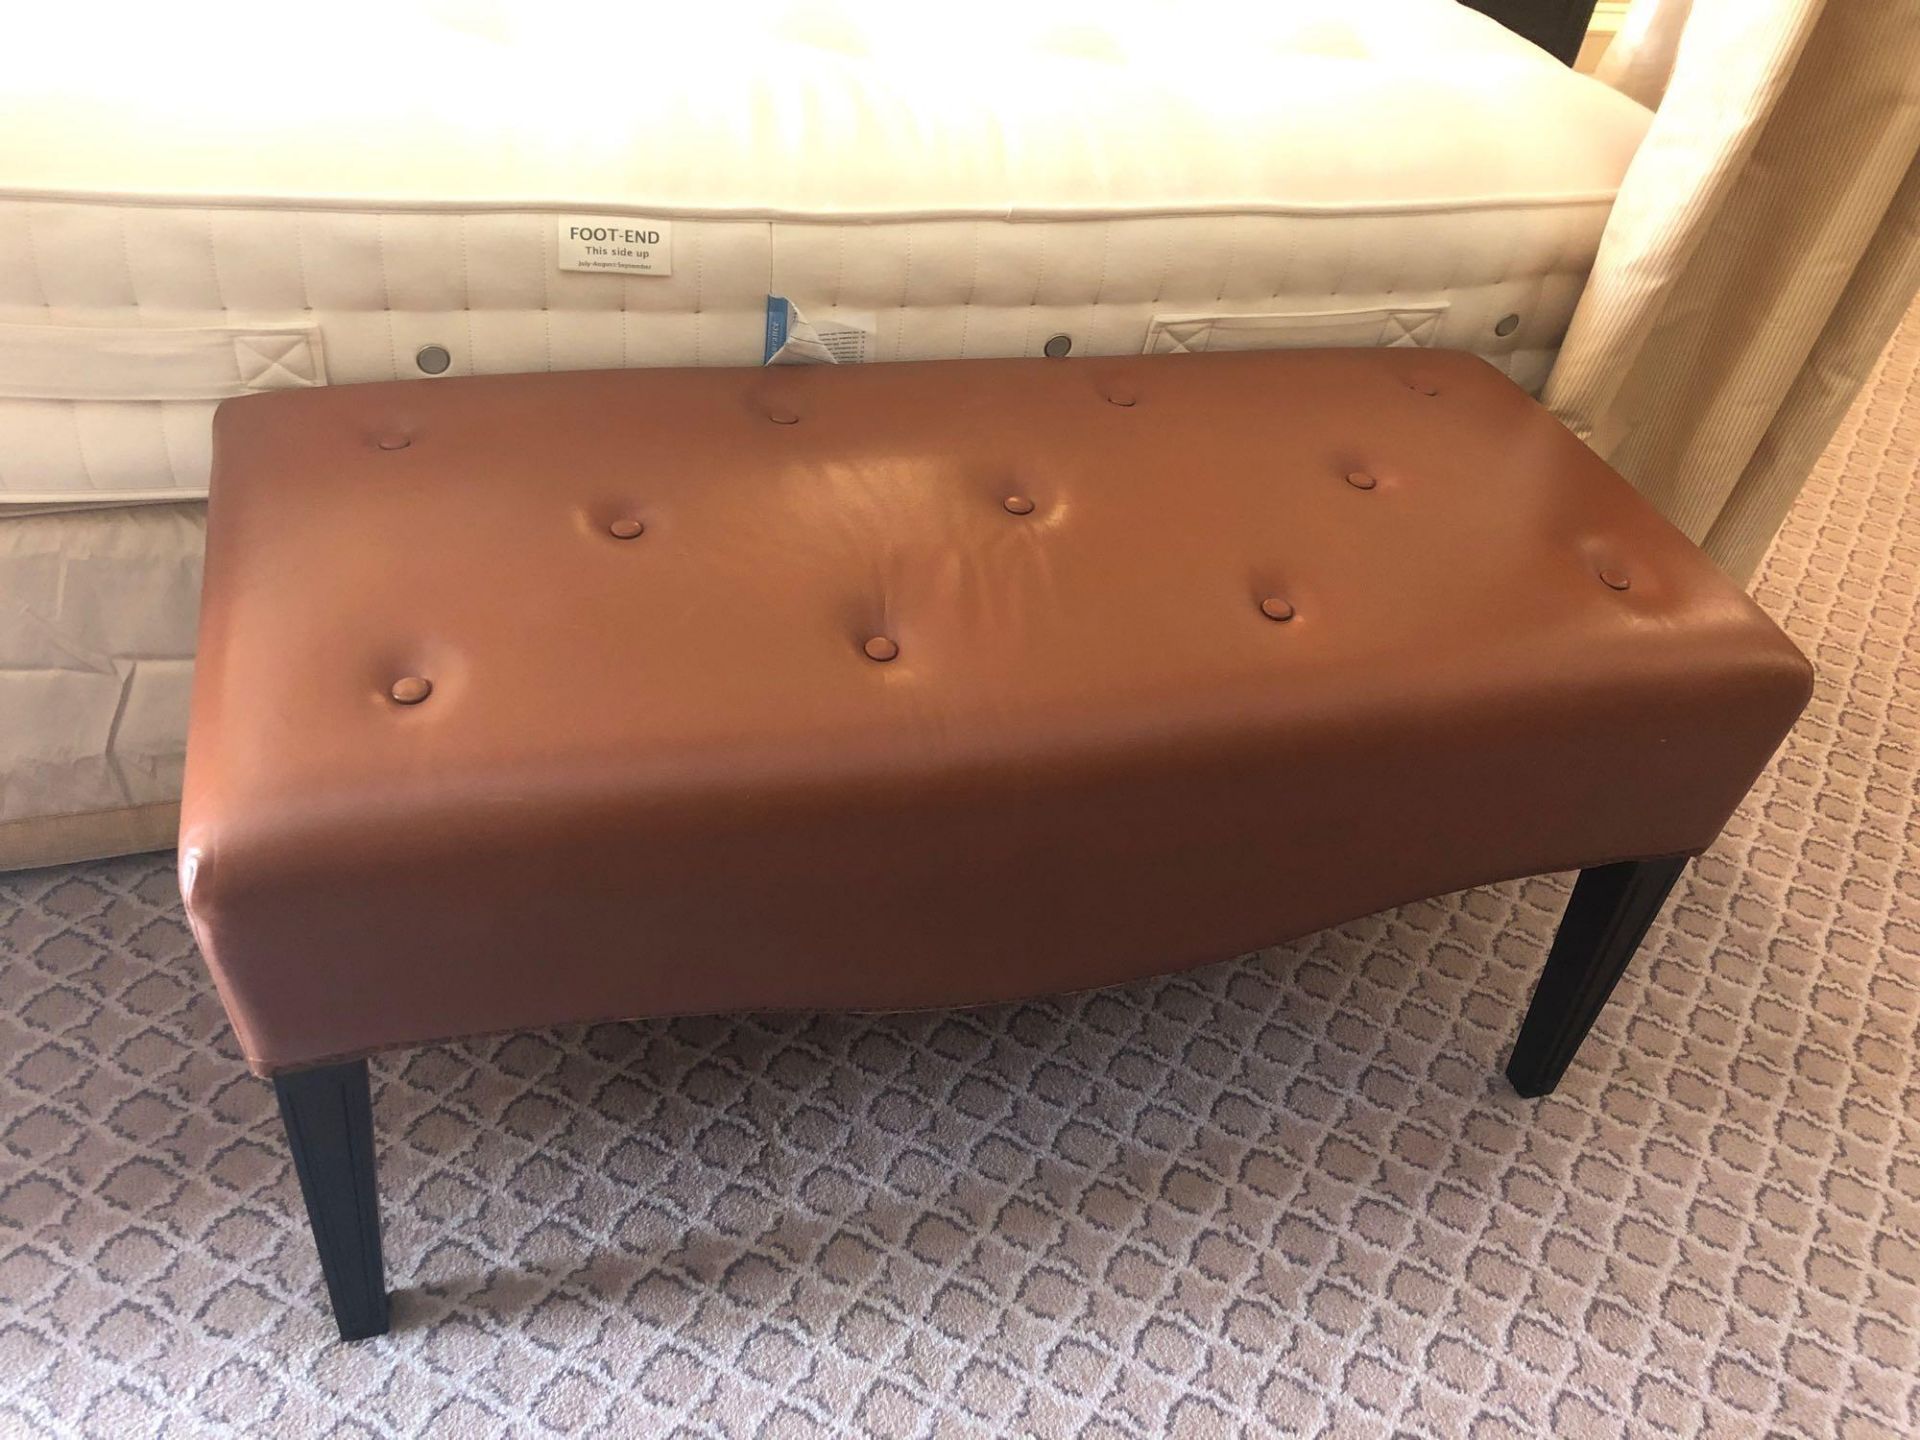 Tufted Leather Bench With Scrolled Apron 100 x 46 x 47cm (Room 209)